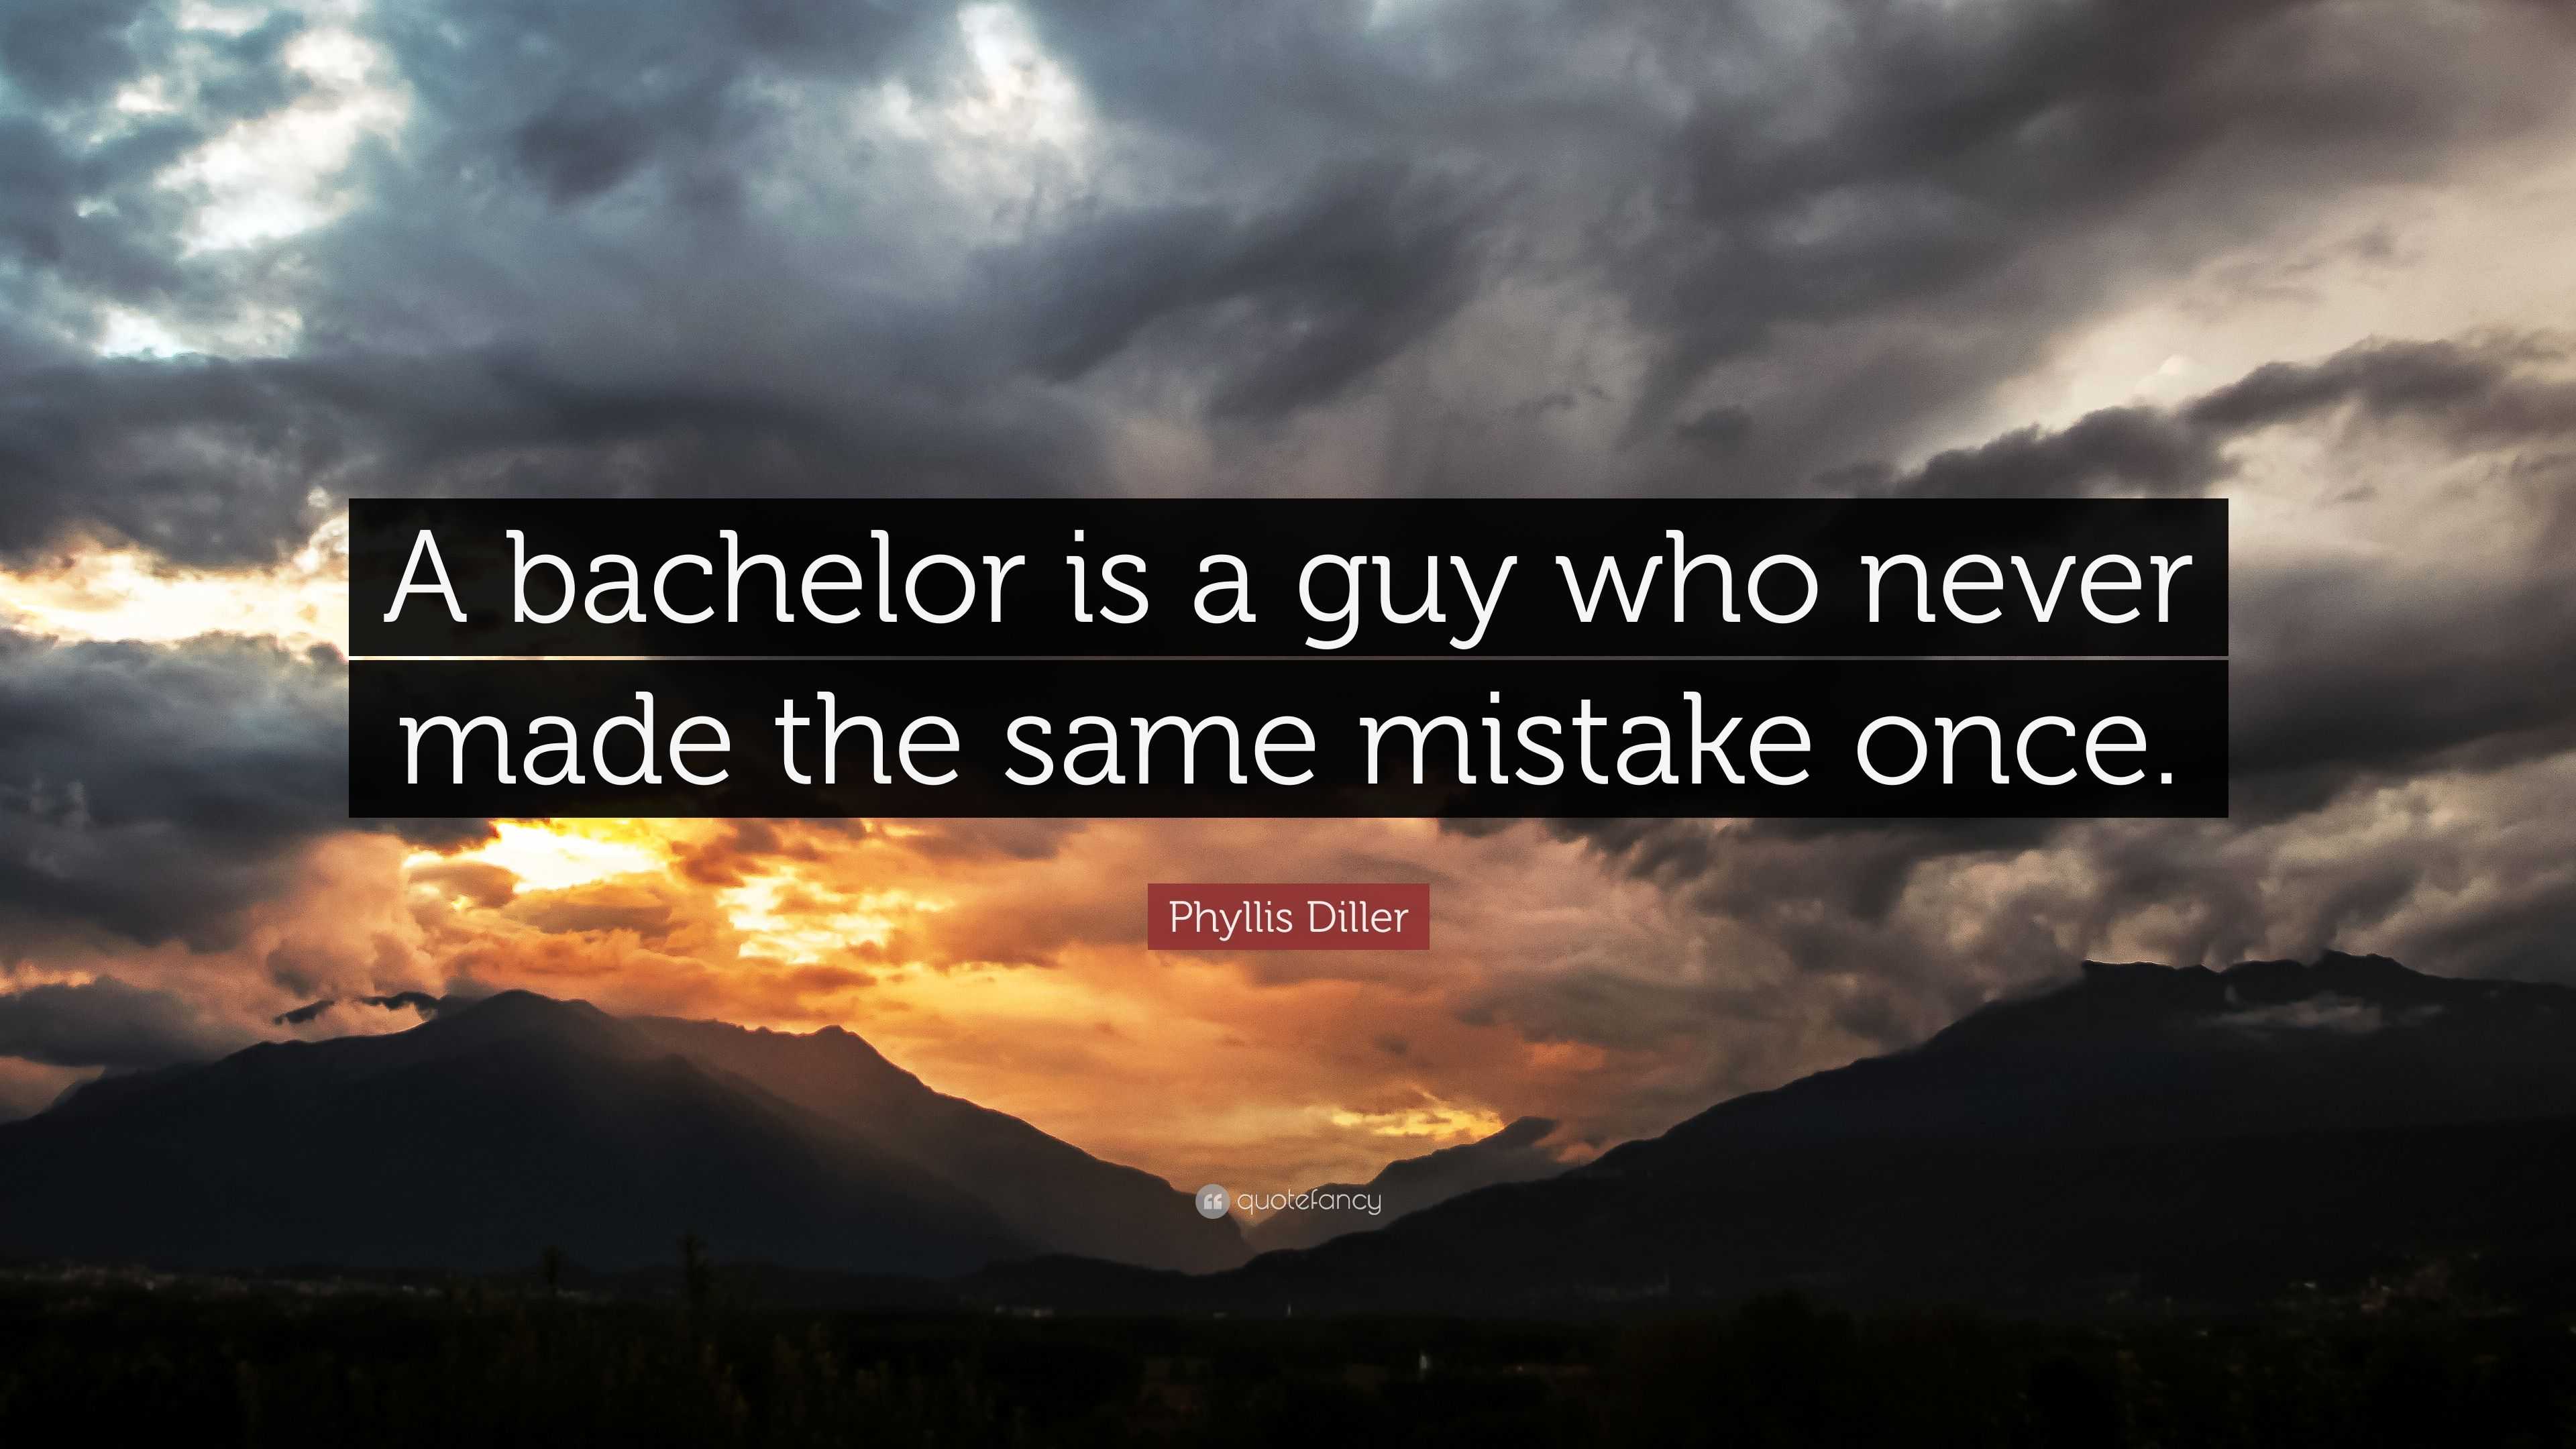 Phyllis Diller Quote A Bachelor Is A Guy Who Never Made The Same Mistake Once